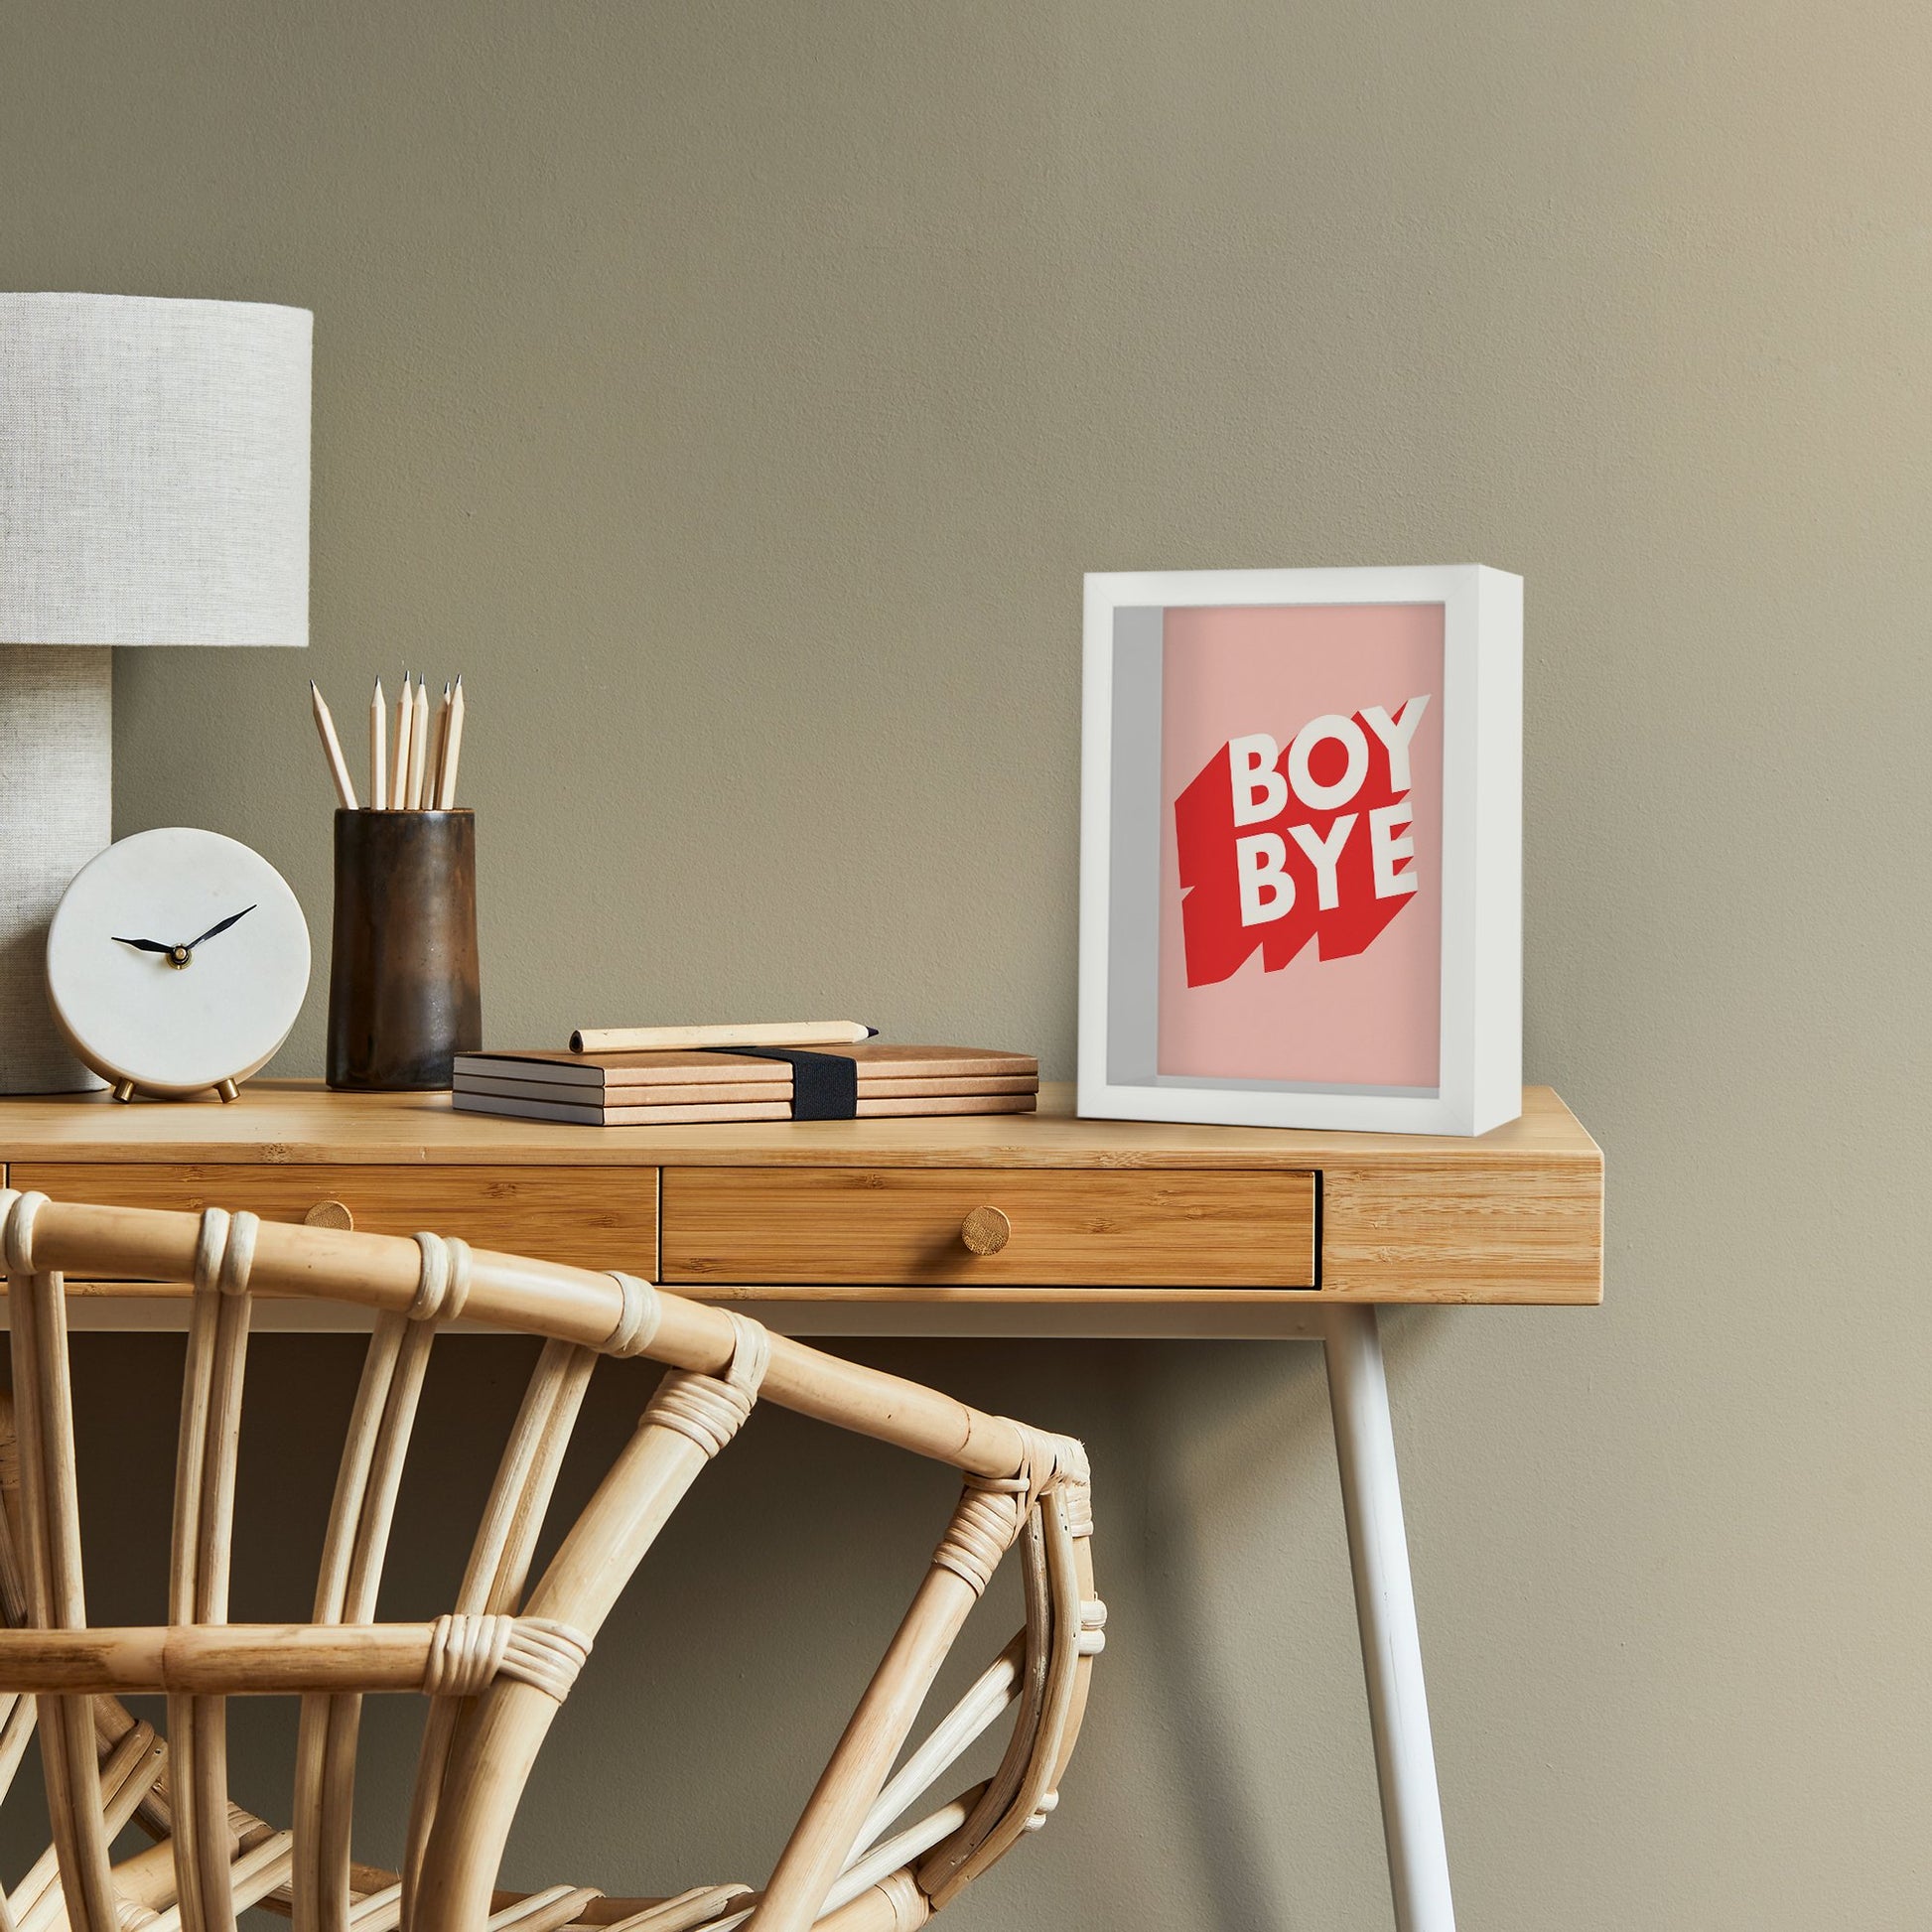 Boy Bye By Motivated Type - Shadow Box Framed Art - Americanflat